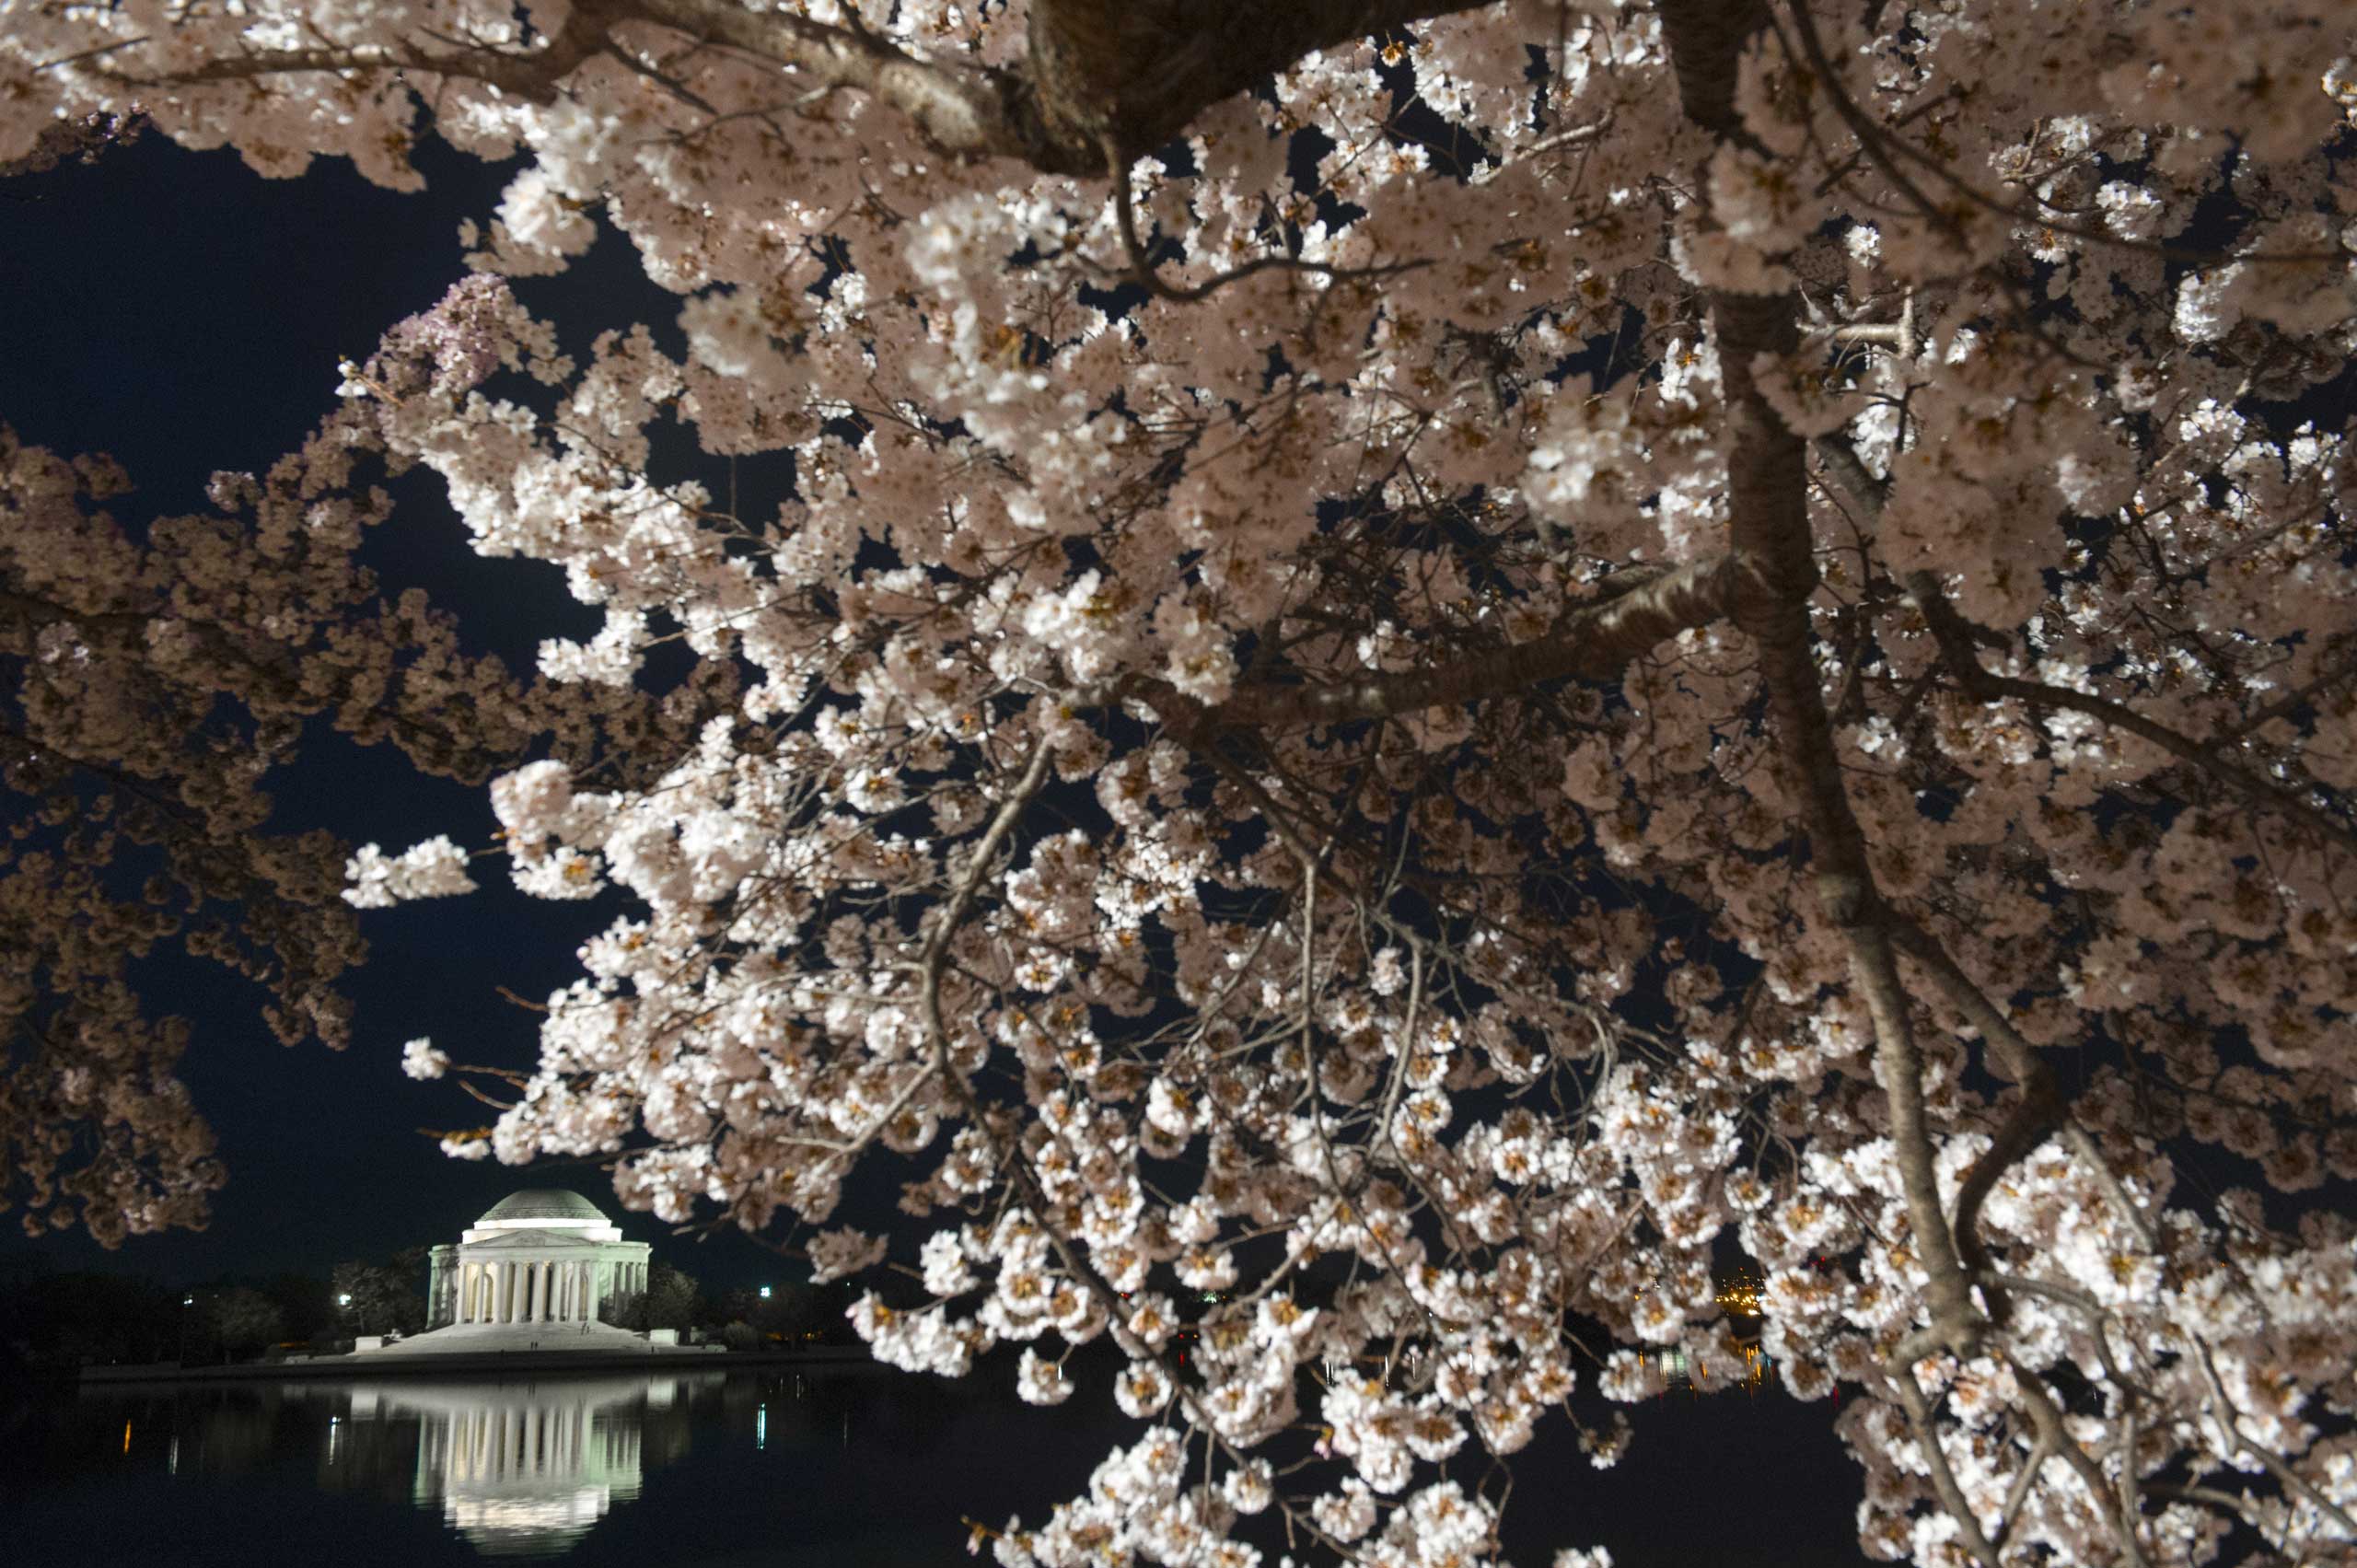 Cherry trees blossom around the Tidal Basin near the Jefferson Memorial on the National Mall in Washington, D.C., April 11, 2015.